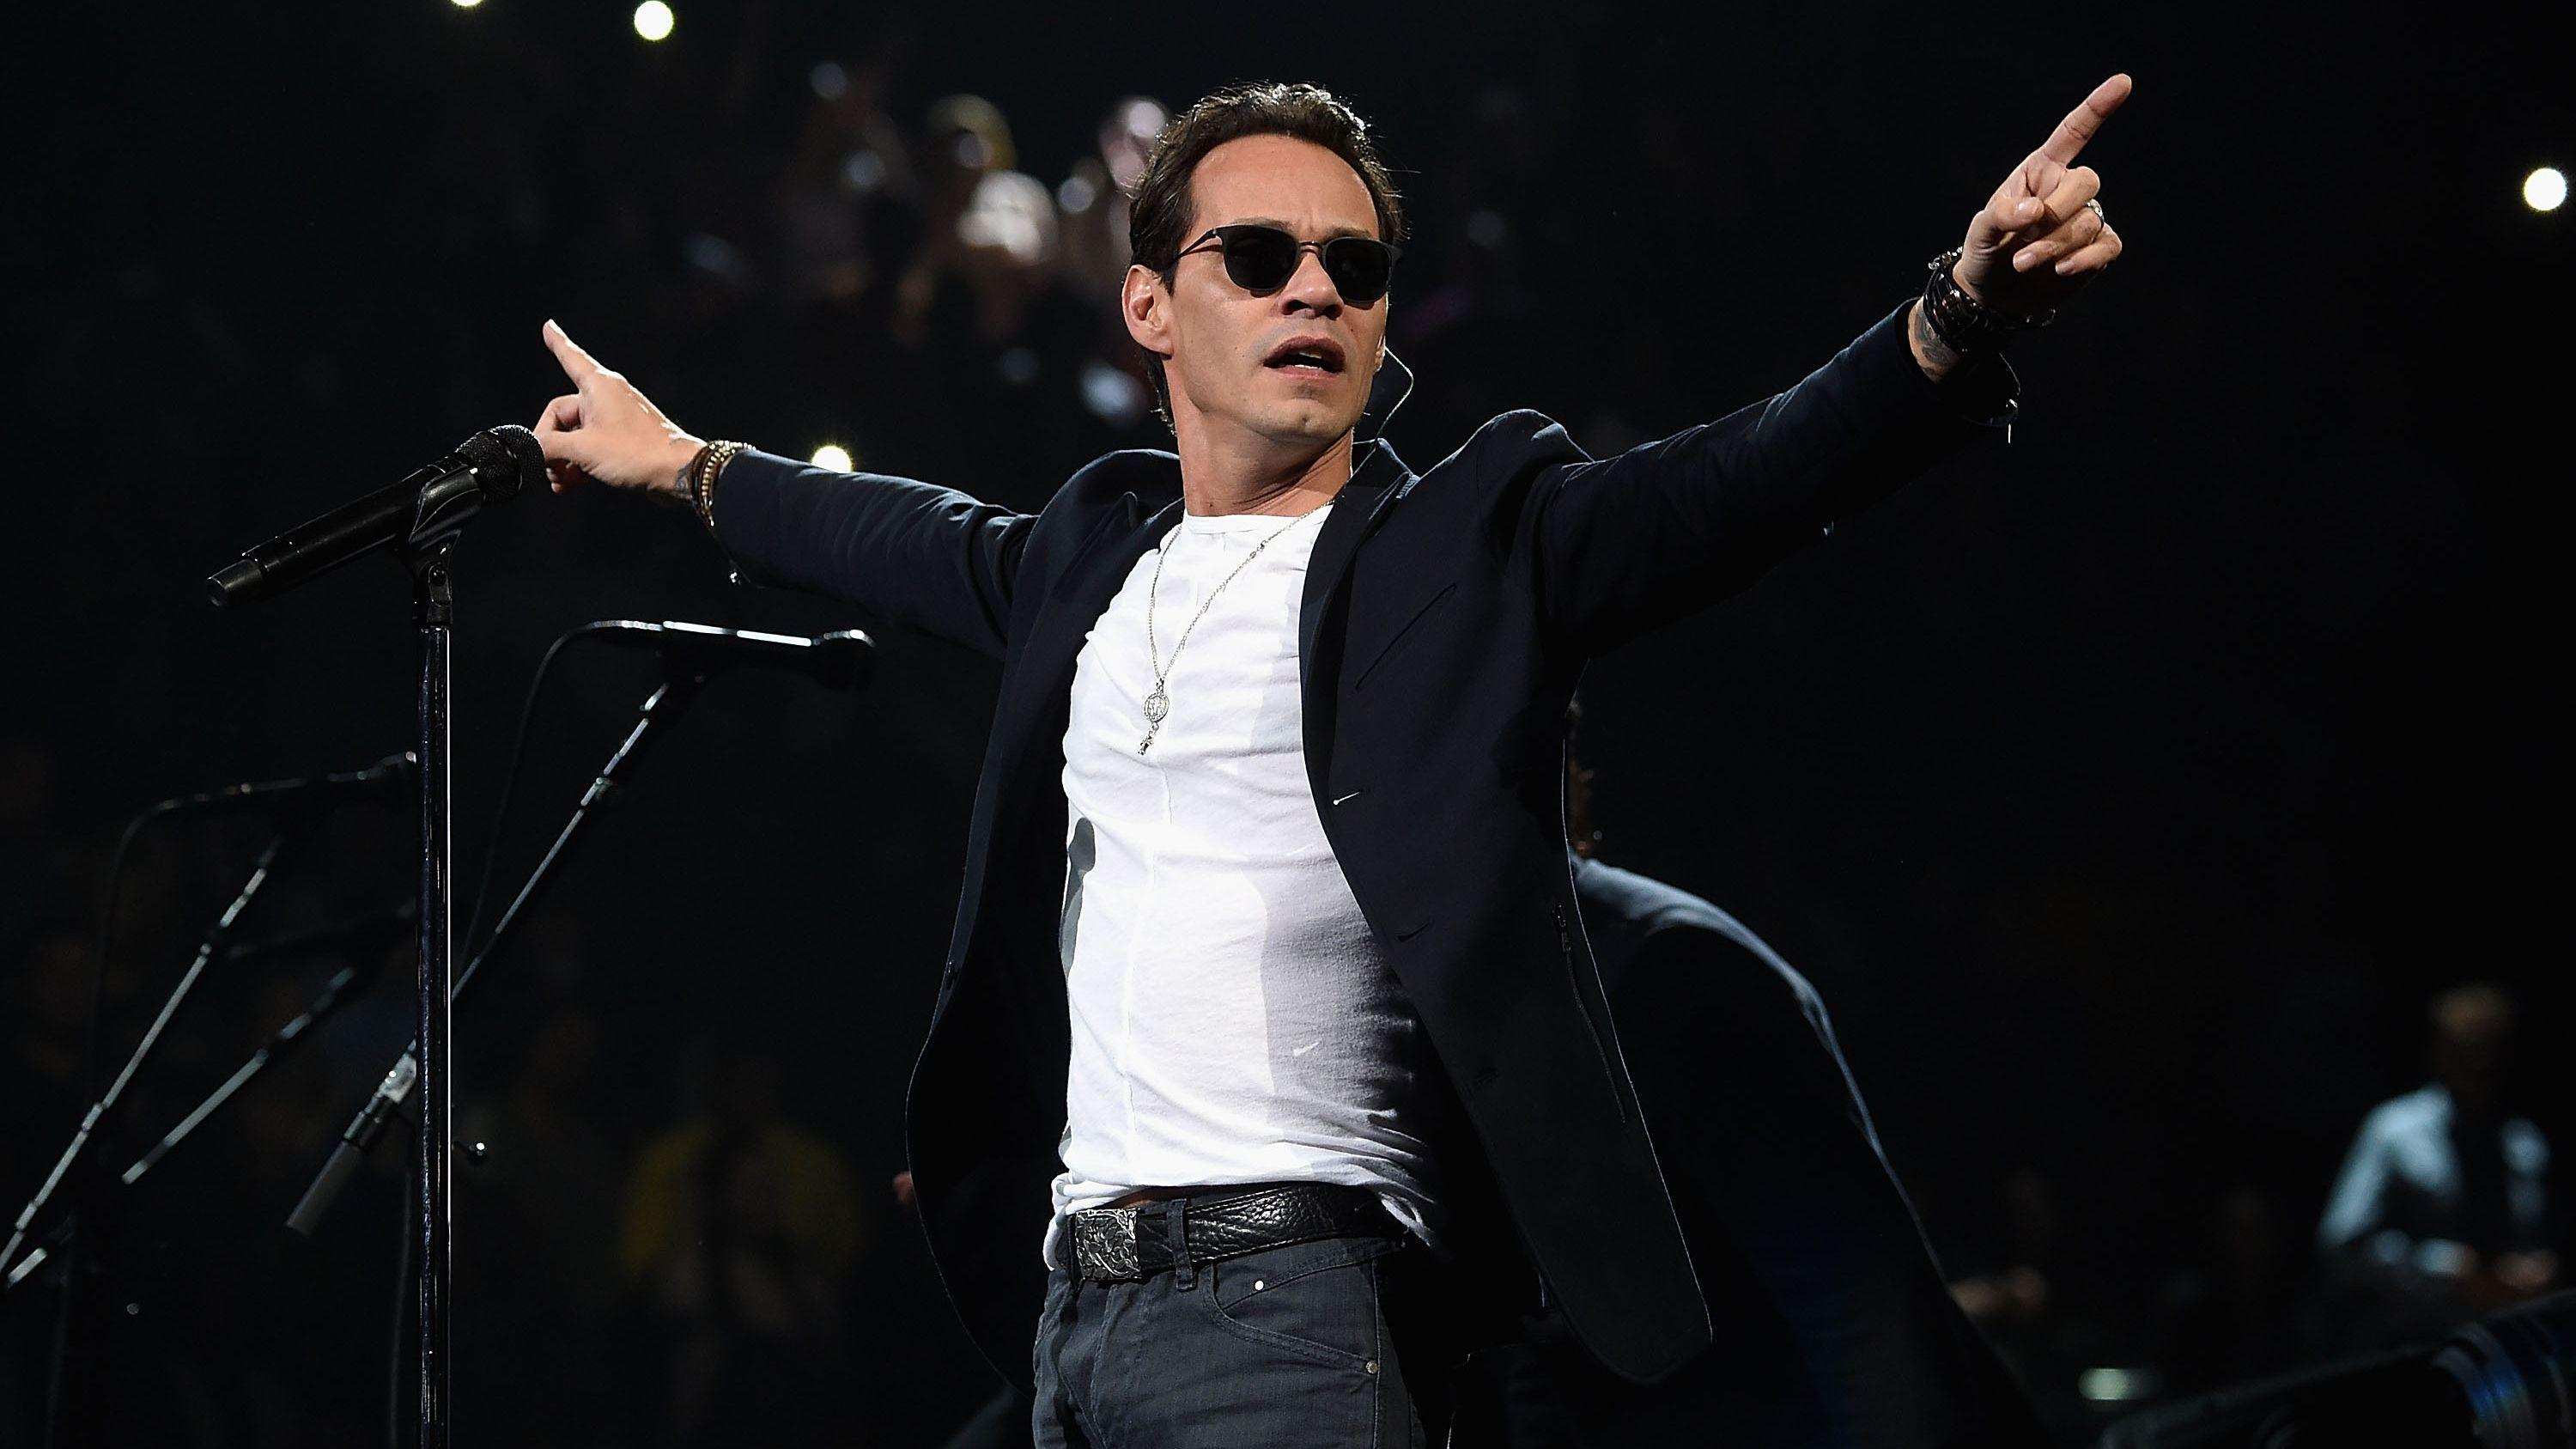 Marc Anthony Wallpapers Image Photos Pictures Backgrounds.